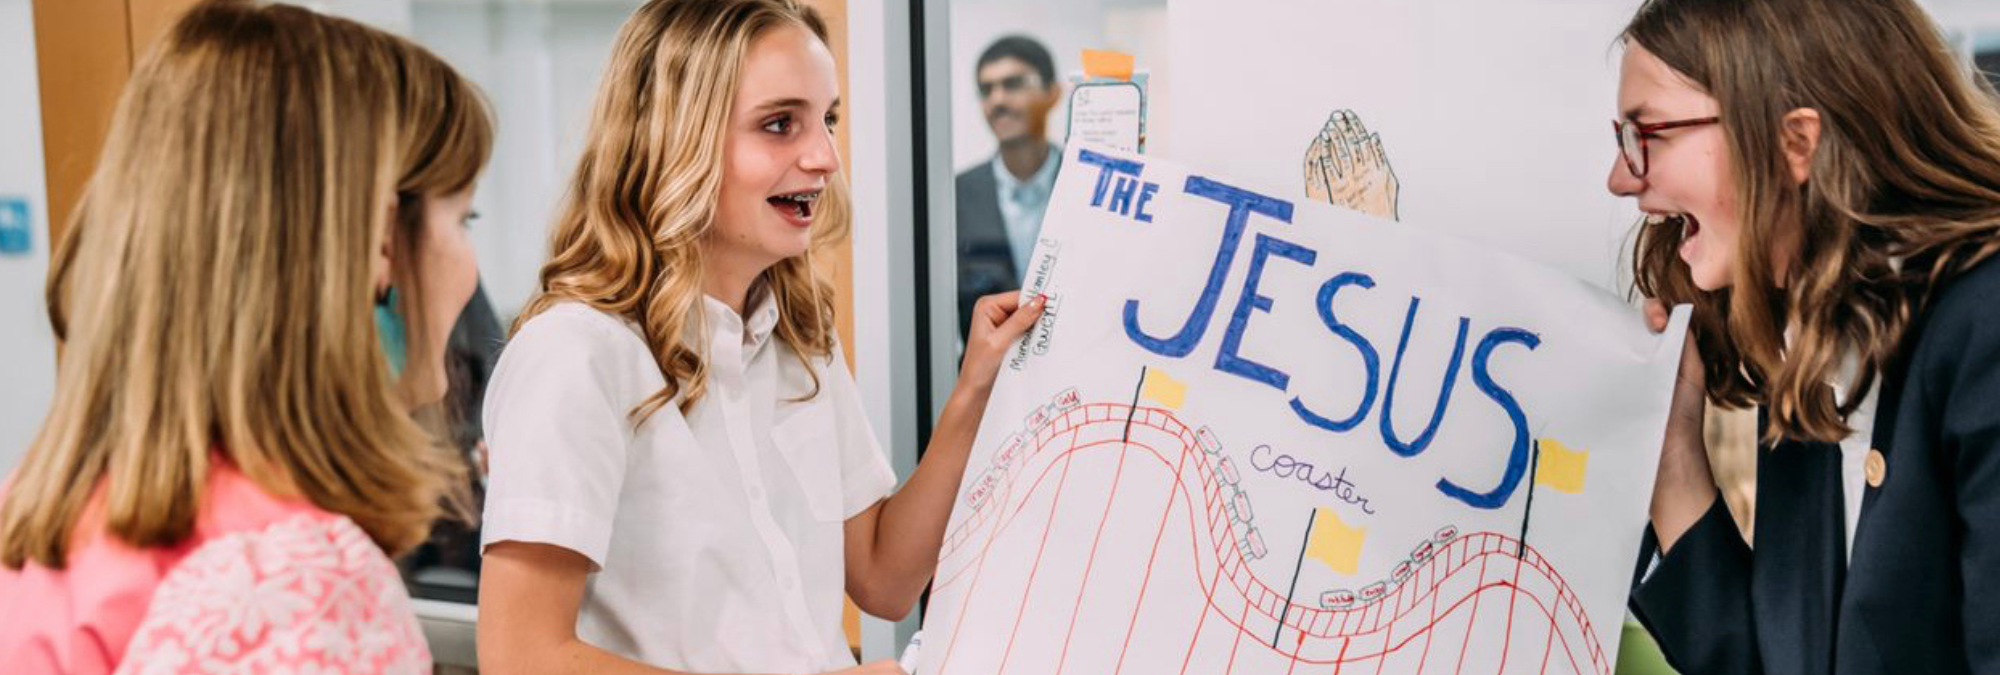 A group of girls students standing around a signboard "The Jesus" at River Oaks Baptist School